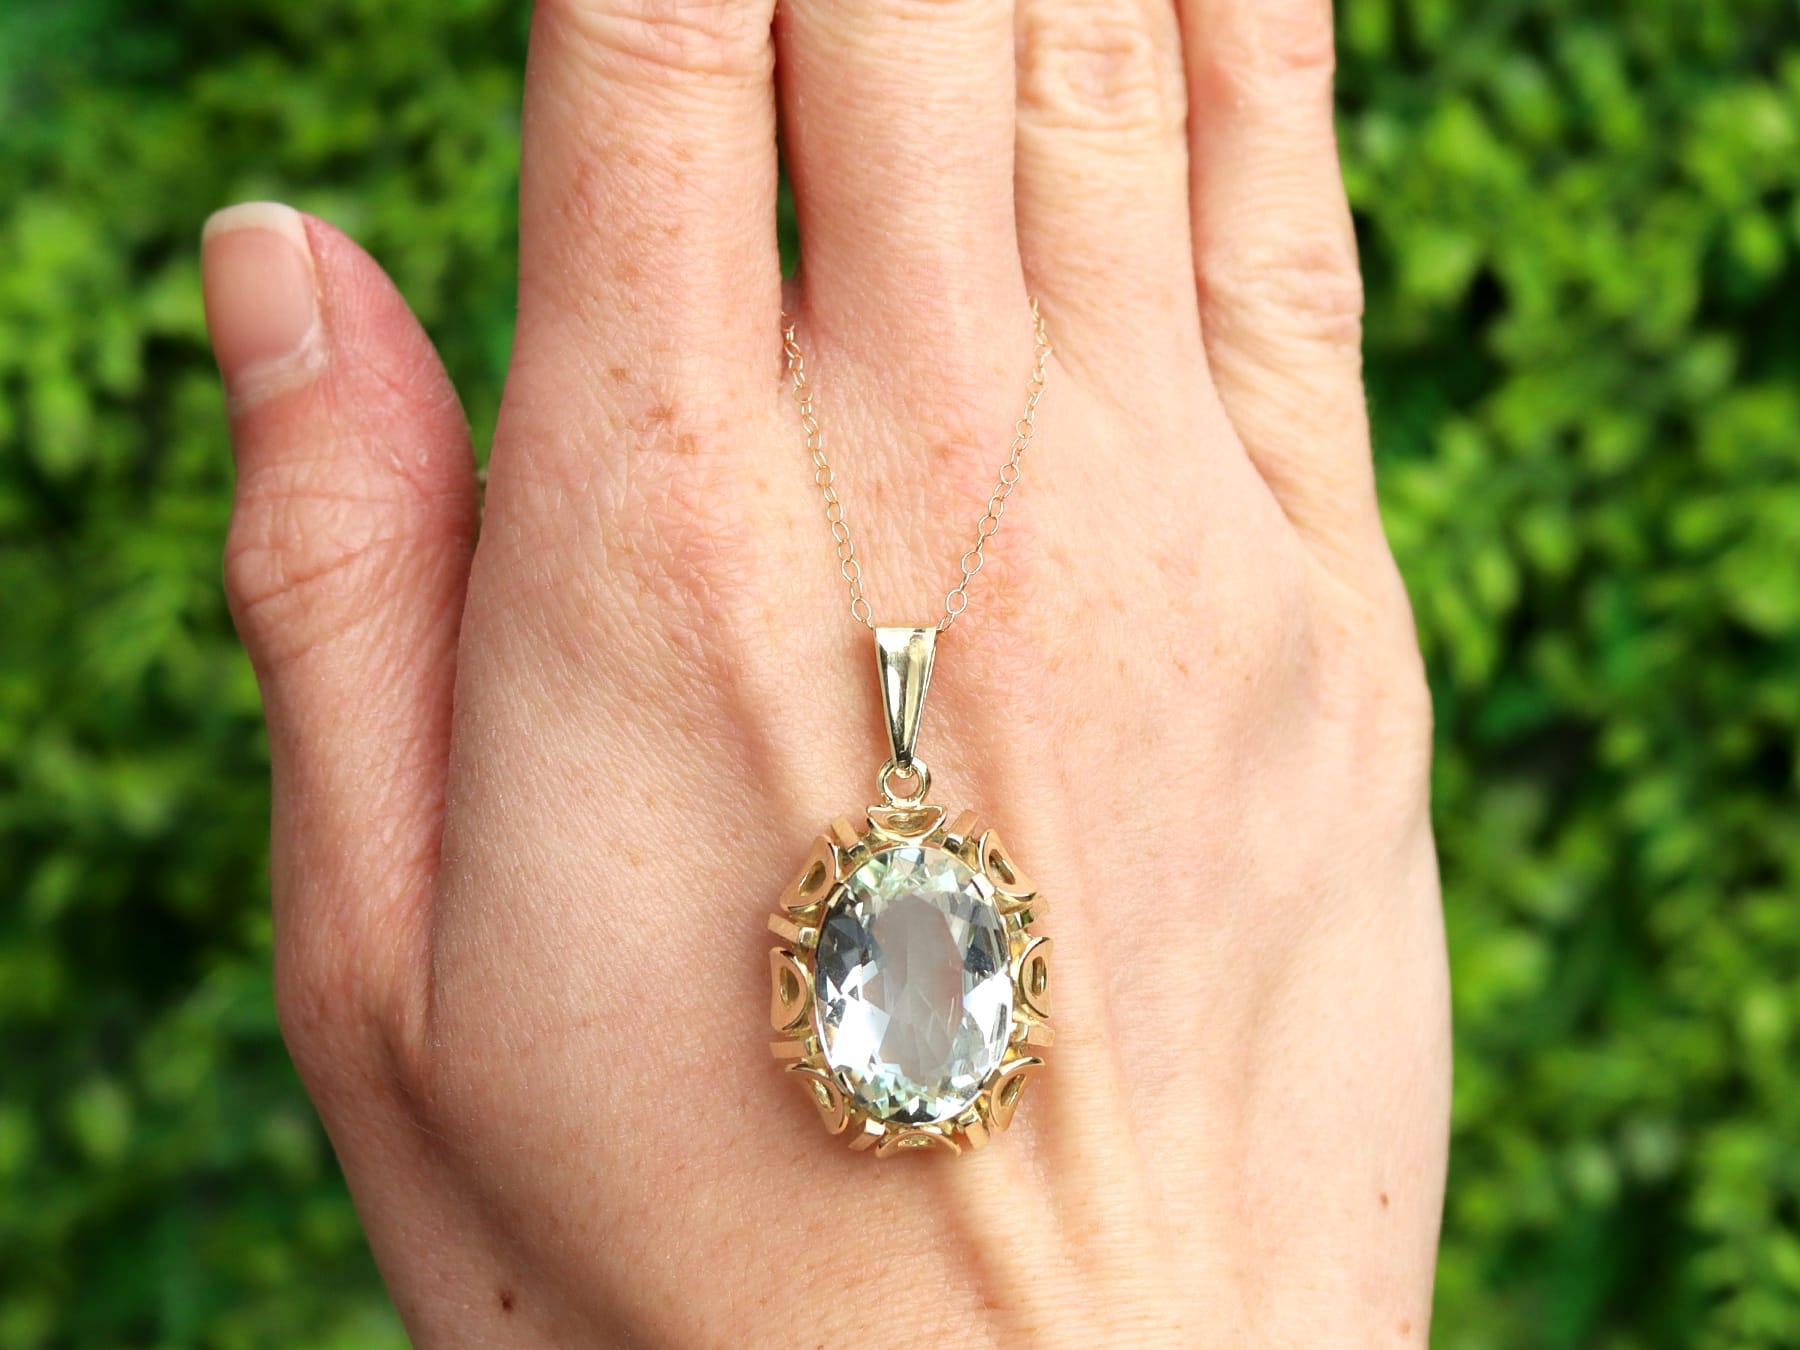 A fine and impressive 11.31 carat aquamarine and 14 karat yellow gold pendant; part of our diverse antique jewelry collections.

This fine and impressive vintage aquamarine pendant has been crafted in 14k yellow gold.

This substantial pierced